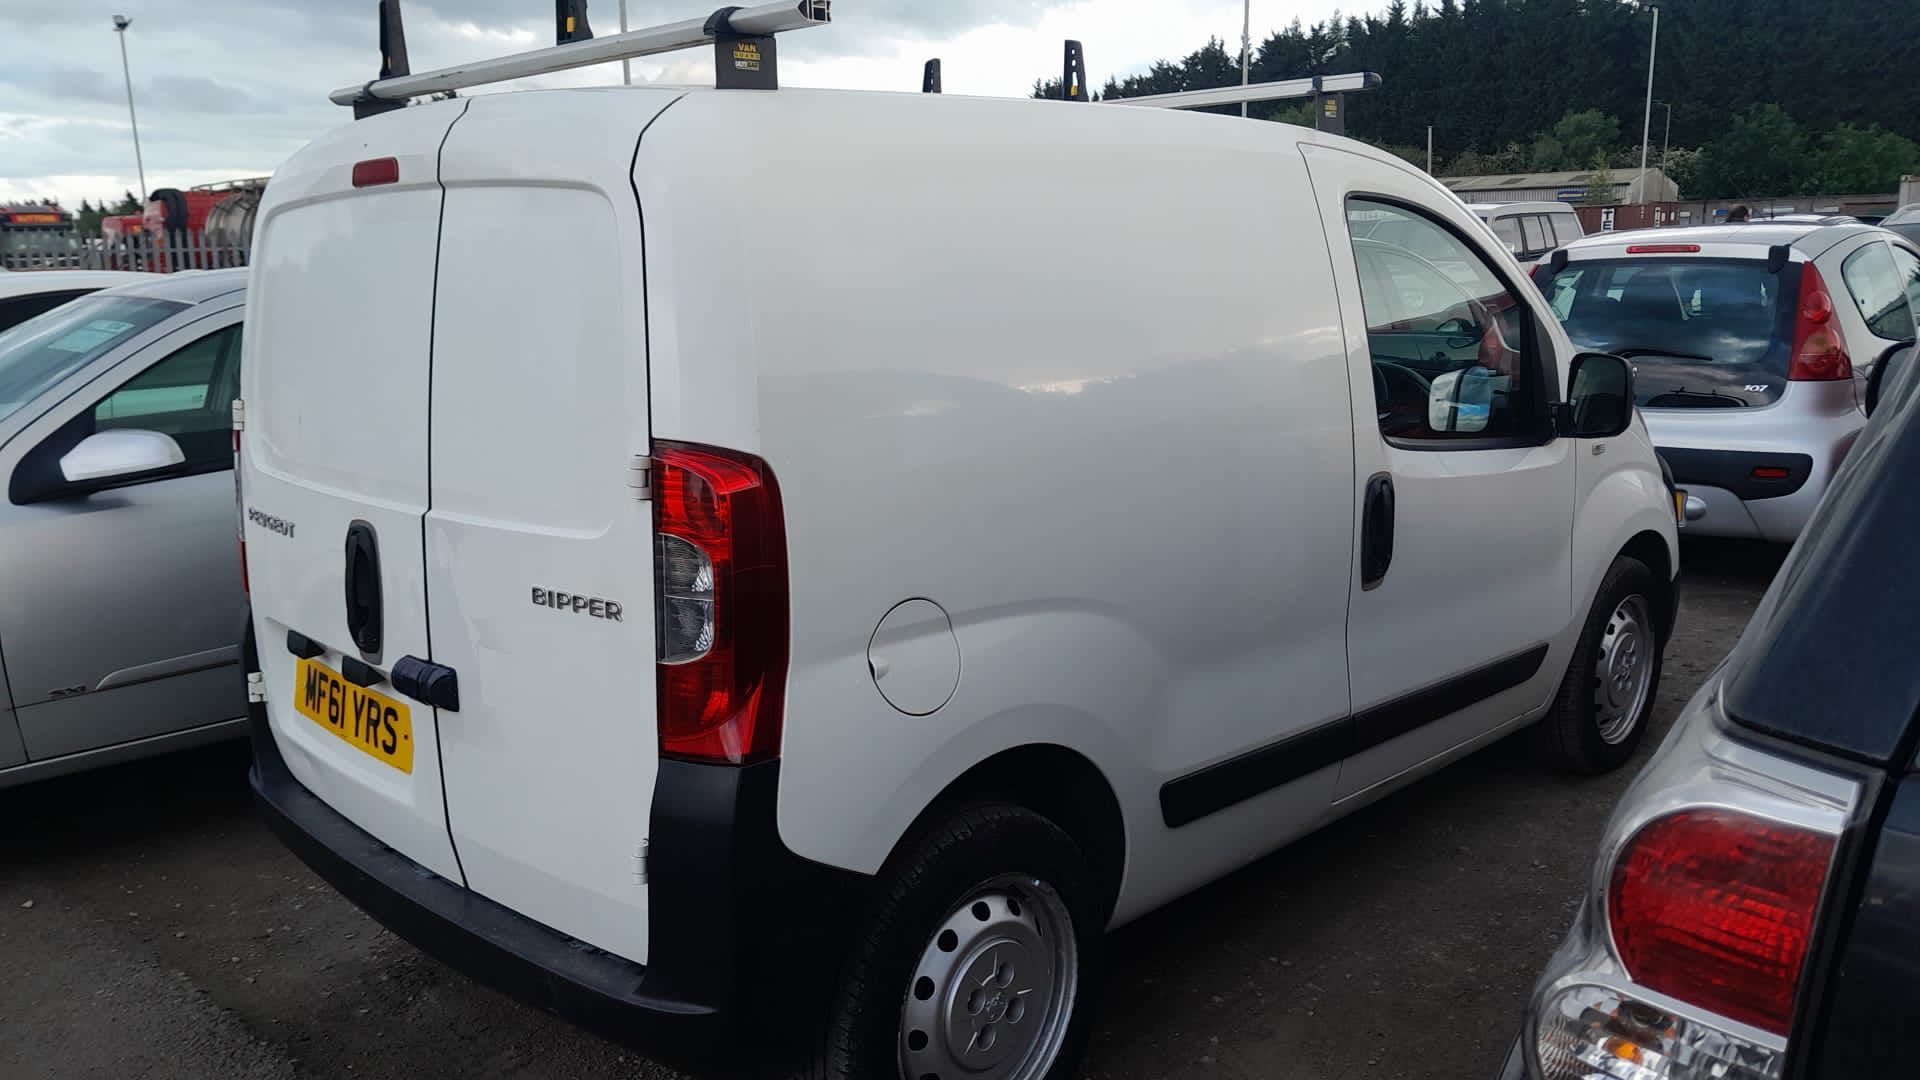 2012/61 PEUGEOT BIPPER S HDI white panel van, 124k Miles, low miles for the year *NO VAT* - Image 4 of 6